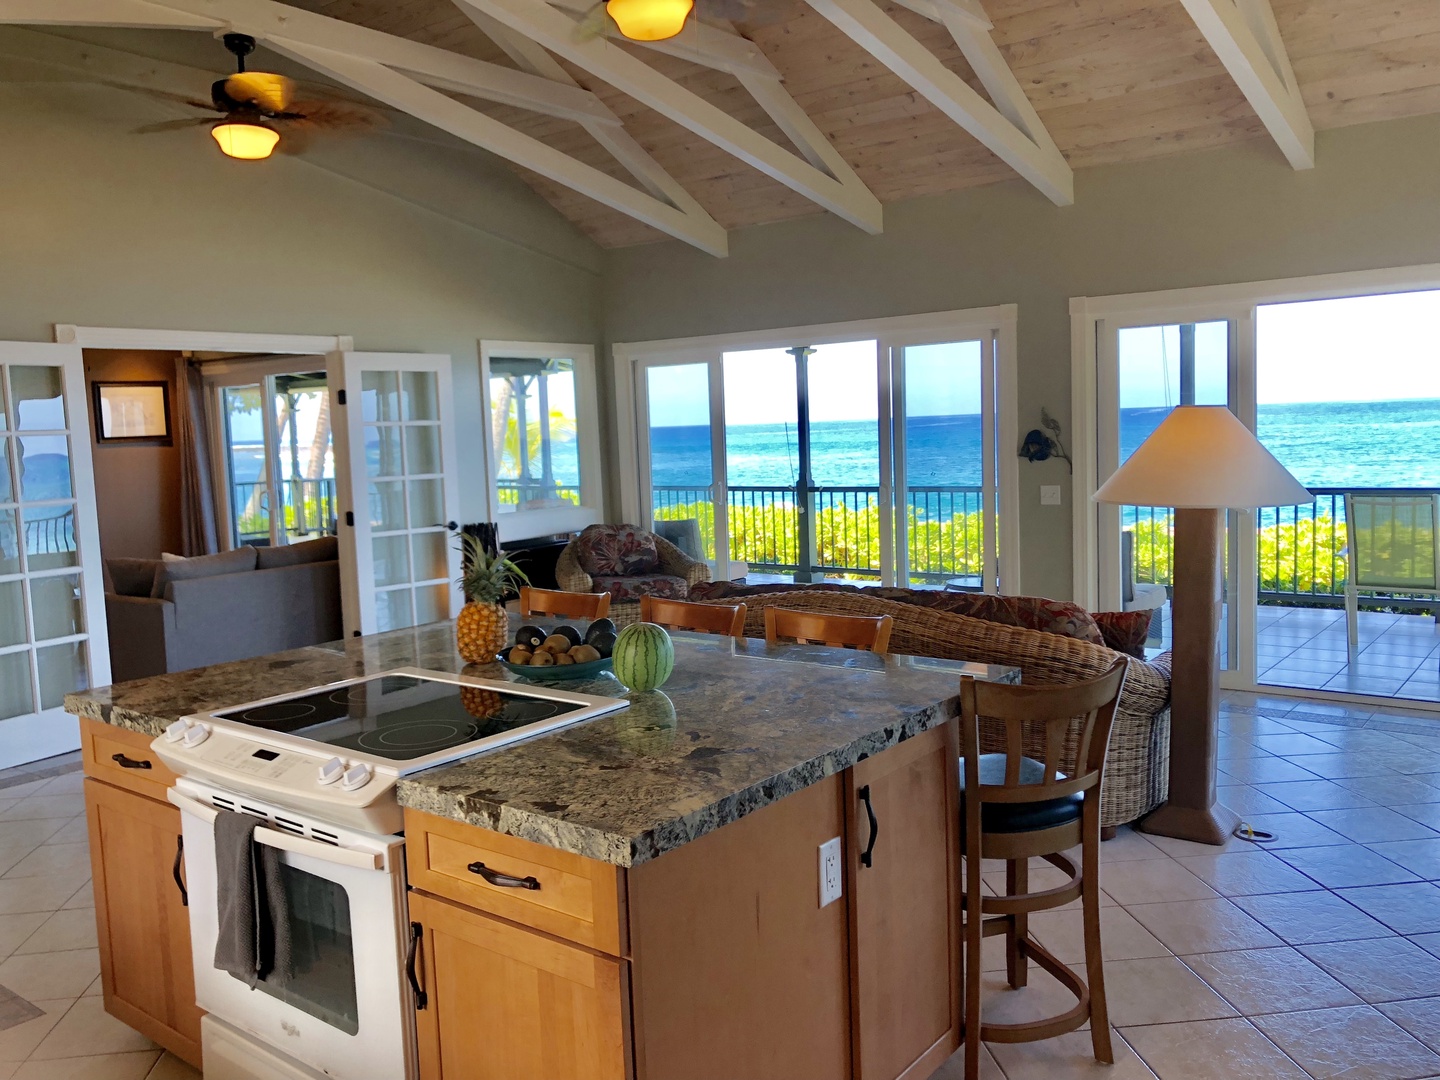 Kailua Kona Vacation Rentals, Hoku'Ea Hale - Newly remodeled kitchen with Ocean View